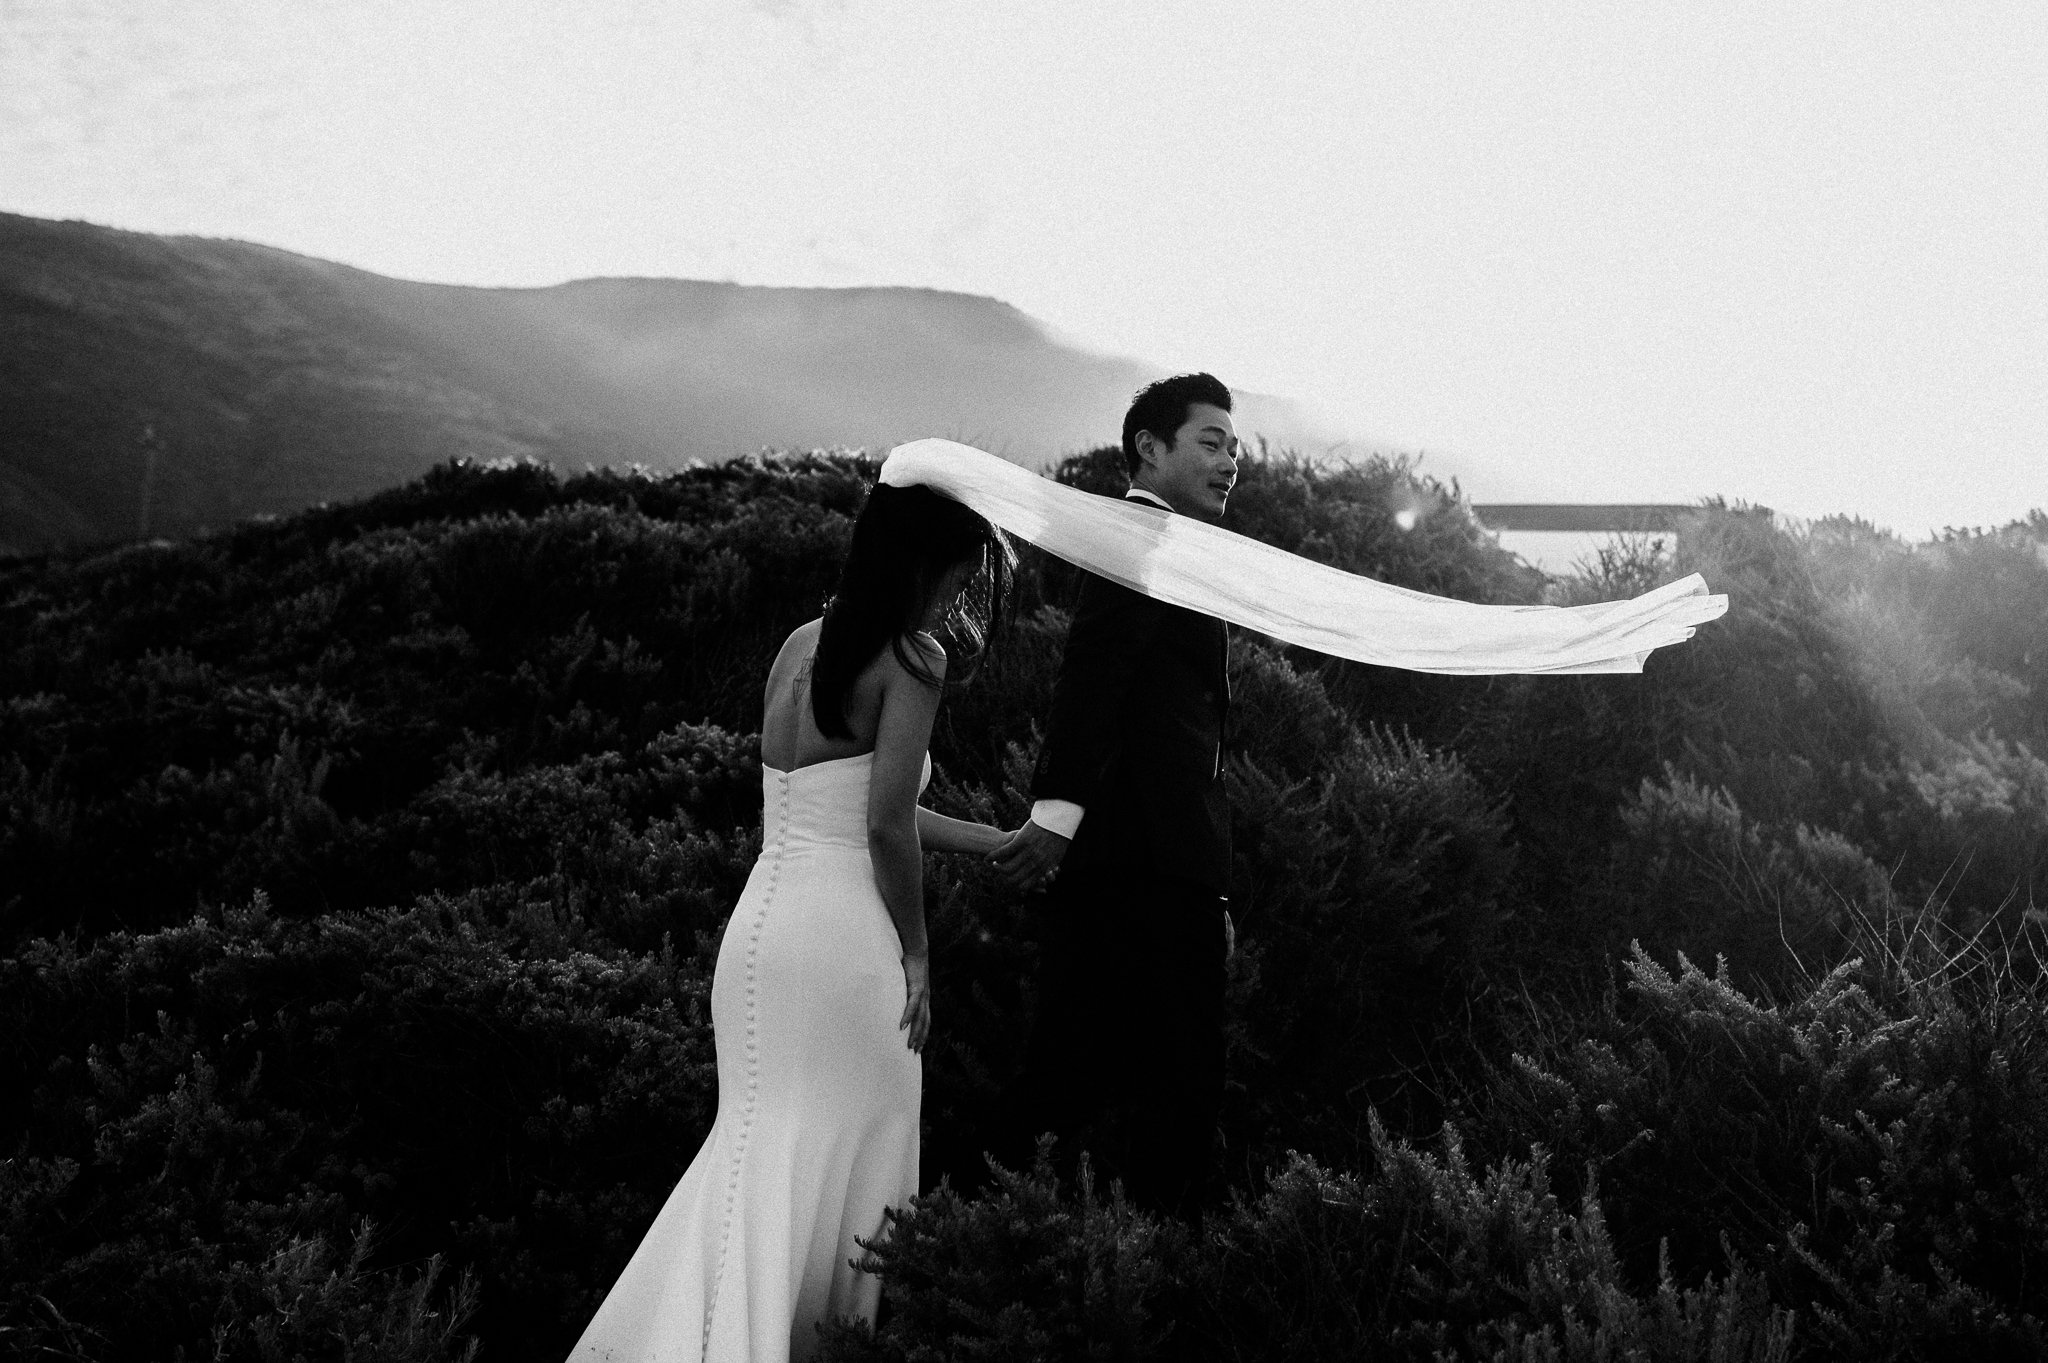 Black and white photo bride and groom walking on trail in wedding attire brides vail blowing in wind